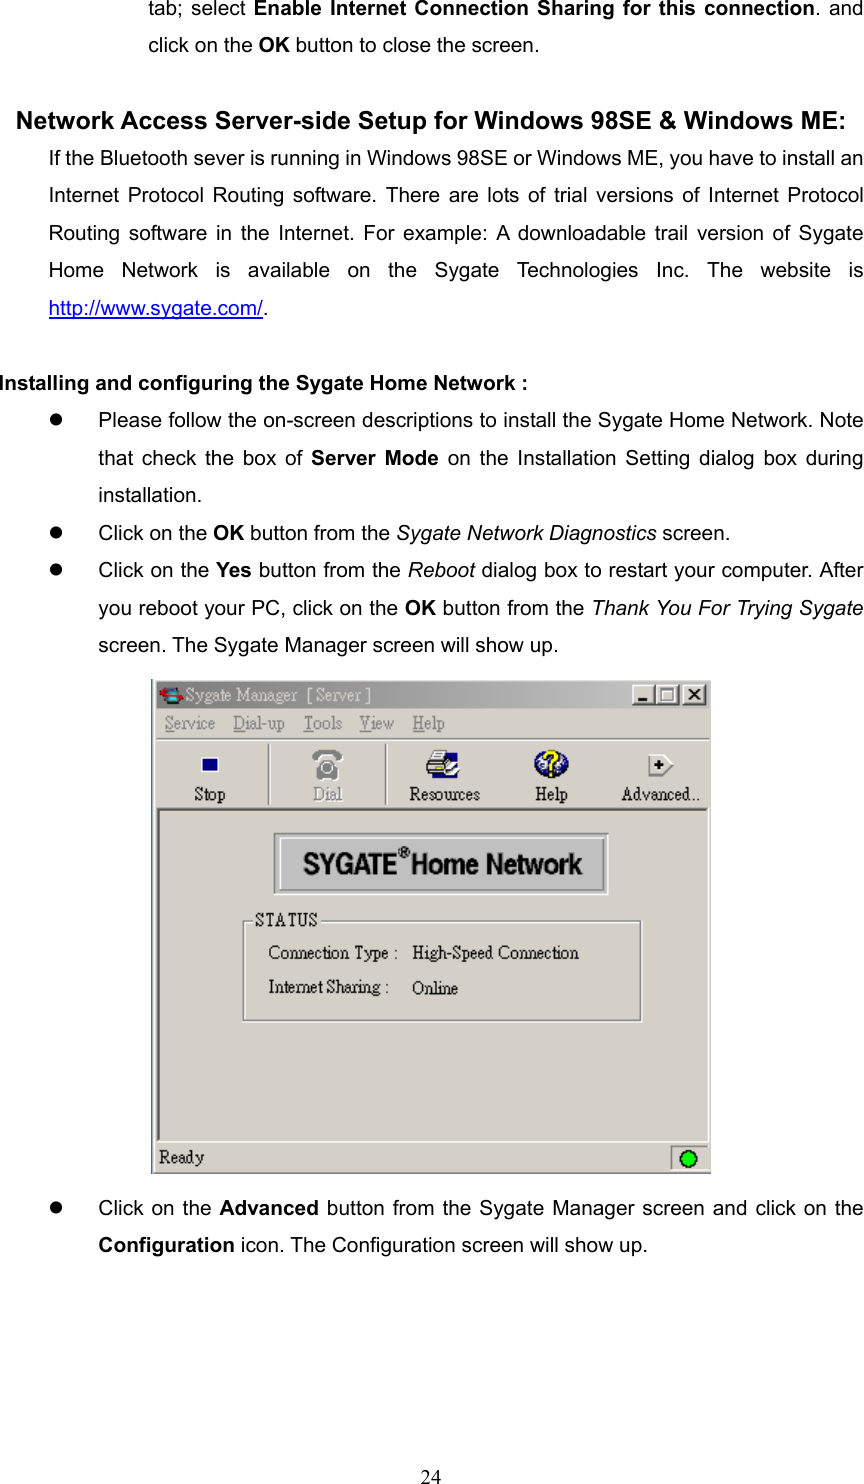  24 tab; select Enable Internet Connection Sharing for this connection. and click on the OK button to close the screen.  Network Access Server-side Setup for Windows 98SE &amp; Windows ME: If the Bluetooth sever is running in Windows 98SE or Windows ME, you have to install an Internet Protocol Routing software. There are lots of trial versions of Internet Protocol Routing software in the Internet. For example: A downloadable trail version of Sygate Home Network is available on the Sygate Technologies Inc. The website is http://www.sygate.com/.   Installing and configuring the Sygate Home Network :   Please follow the on-screen descriptions to install the Sygate Home Network. Note that check the box of Server Mode on the Installation Setting dialog box during installation.    Click on the OK button from the Sygate Network Diagnostics screen.    Click on the Yes button from the Reboot dialog box to restart your computer. After you reboot your PC, click on the OK button from the Thank You For Trying Sygate screen. The Sygate Manager screen will show up.    Click on the Advanced button from the Sygate Manager screen and click on the Configuration icon. The Configuration screen will show up. 